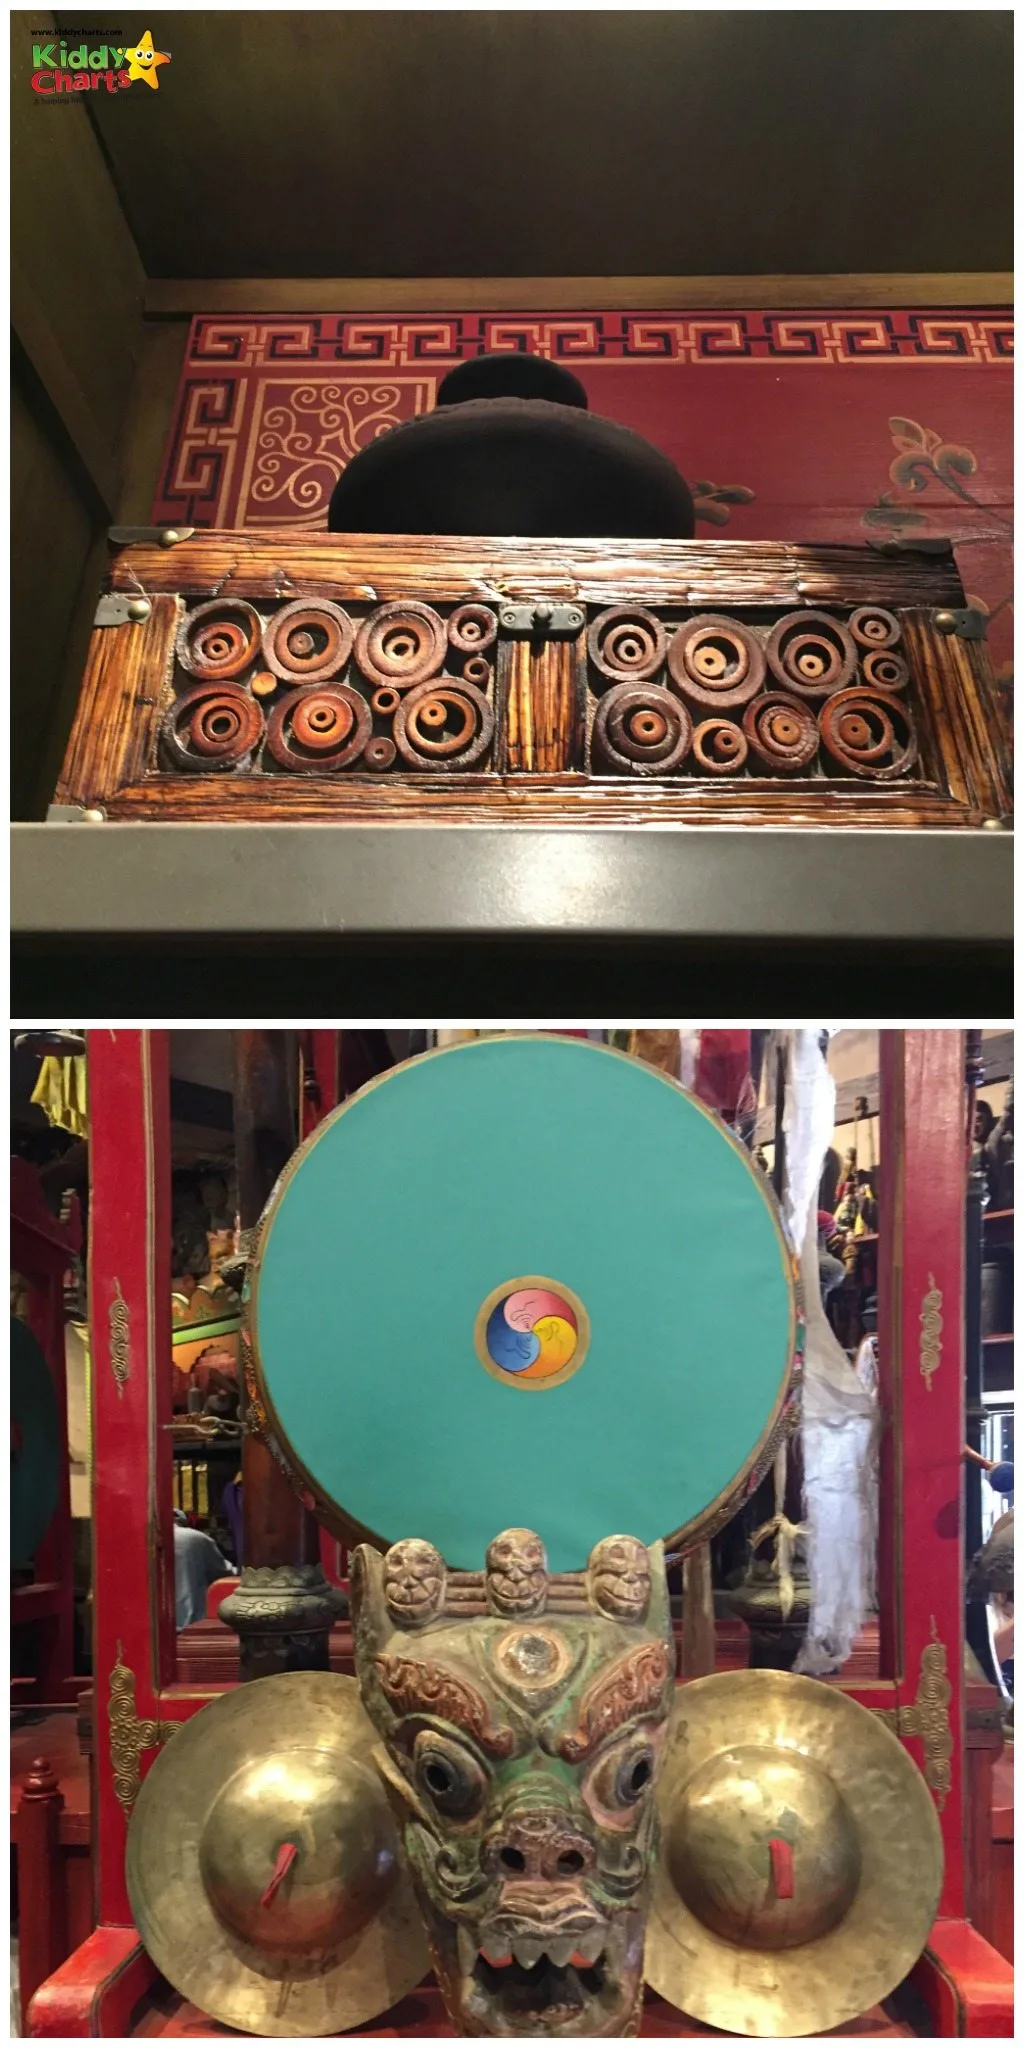 Watch out for two of the best hidden mickets in WDW in the Expedition Everest shop!